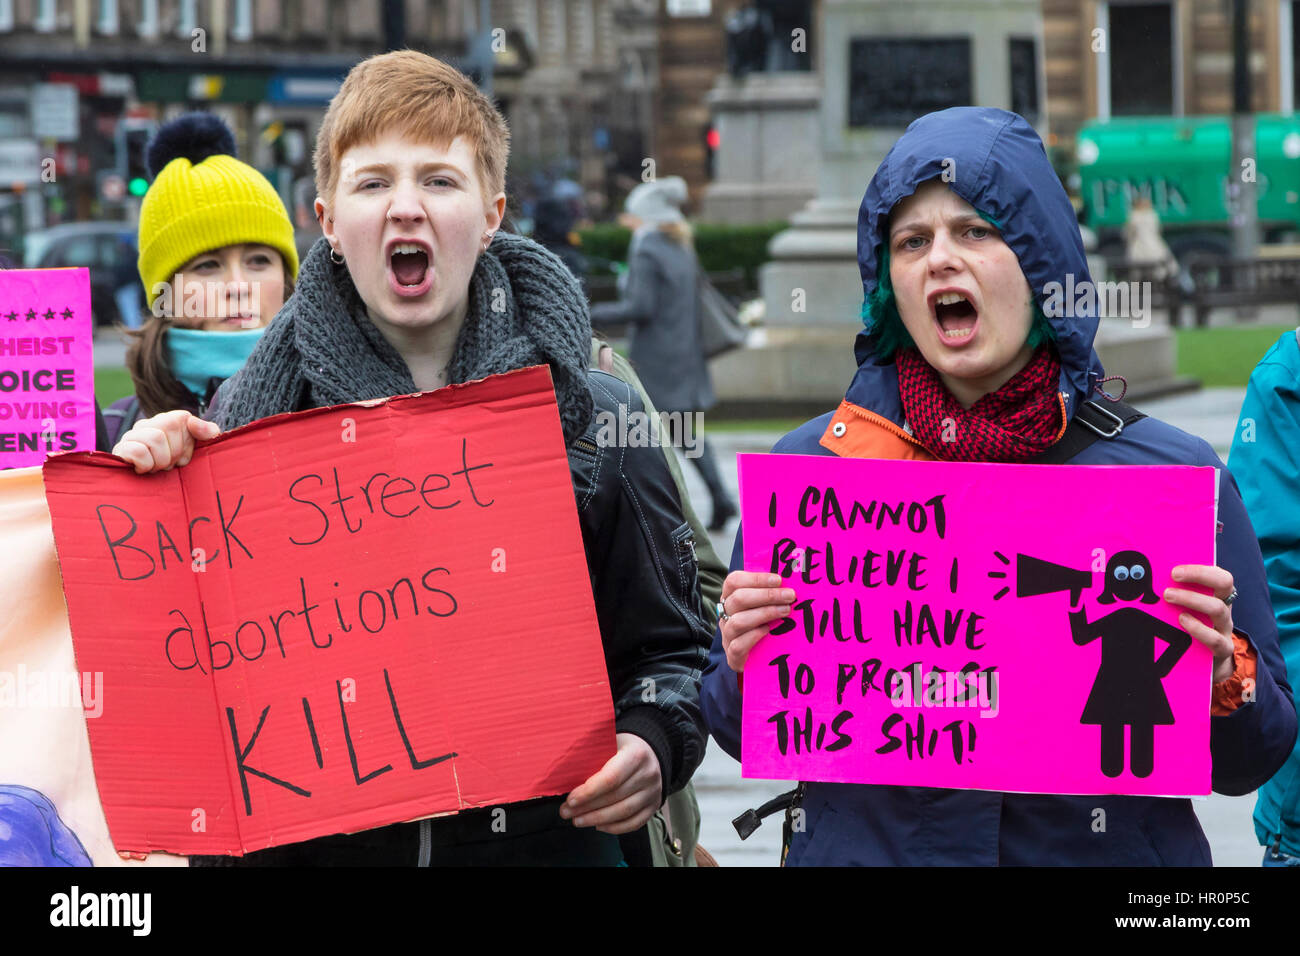 Glasgow, Scotland, UK. 25th Feb, 2017. '40 Days for Life', a Christian Pro-Life and anti abortion group held a prayer meeting in George Square, Glasgow, in preparation for 40 days of prayer, beginning on Ash Wednesday (1 March) and ending on Palm Sunday (9 April), hoping to have the Scottish Executive repeal the Abortion Act 1967. The prayer meeting was confronted by counter demonstration of activists promoting international womens' rights and advocating the 'Right to Choose' Credit: Findlay/Alamy Live News Stock Photo